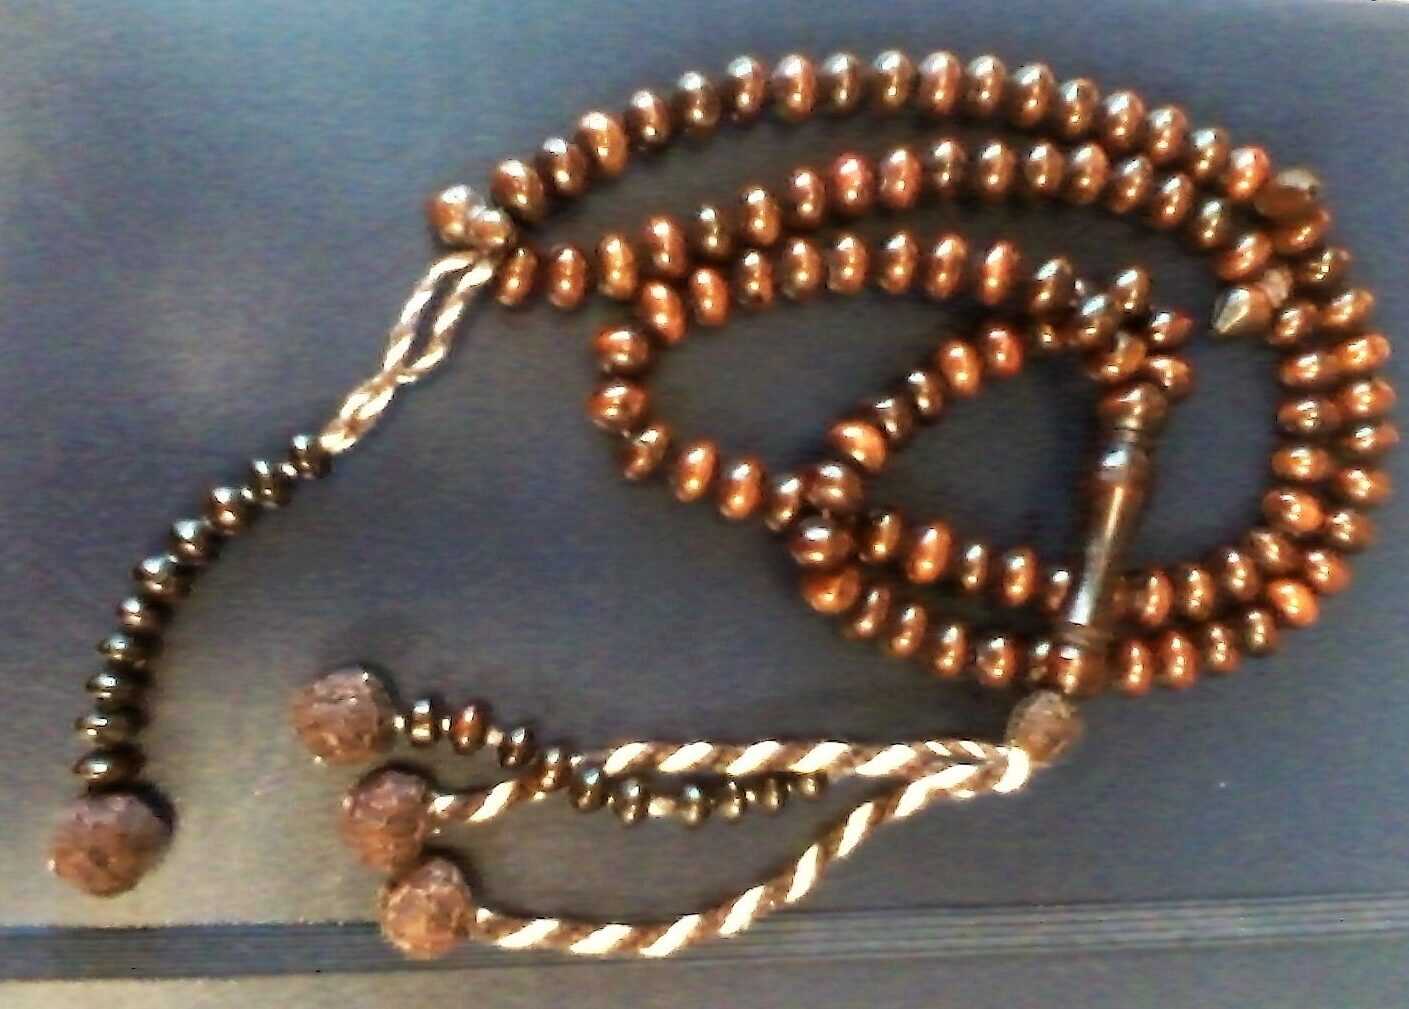 A strand of wooden prayer beads. Most beads are warm colored, golden brown, but ends a beige rope with a single dark bead.